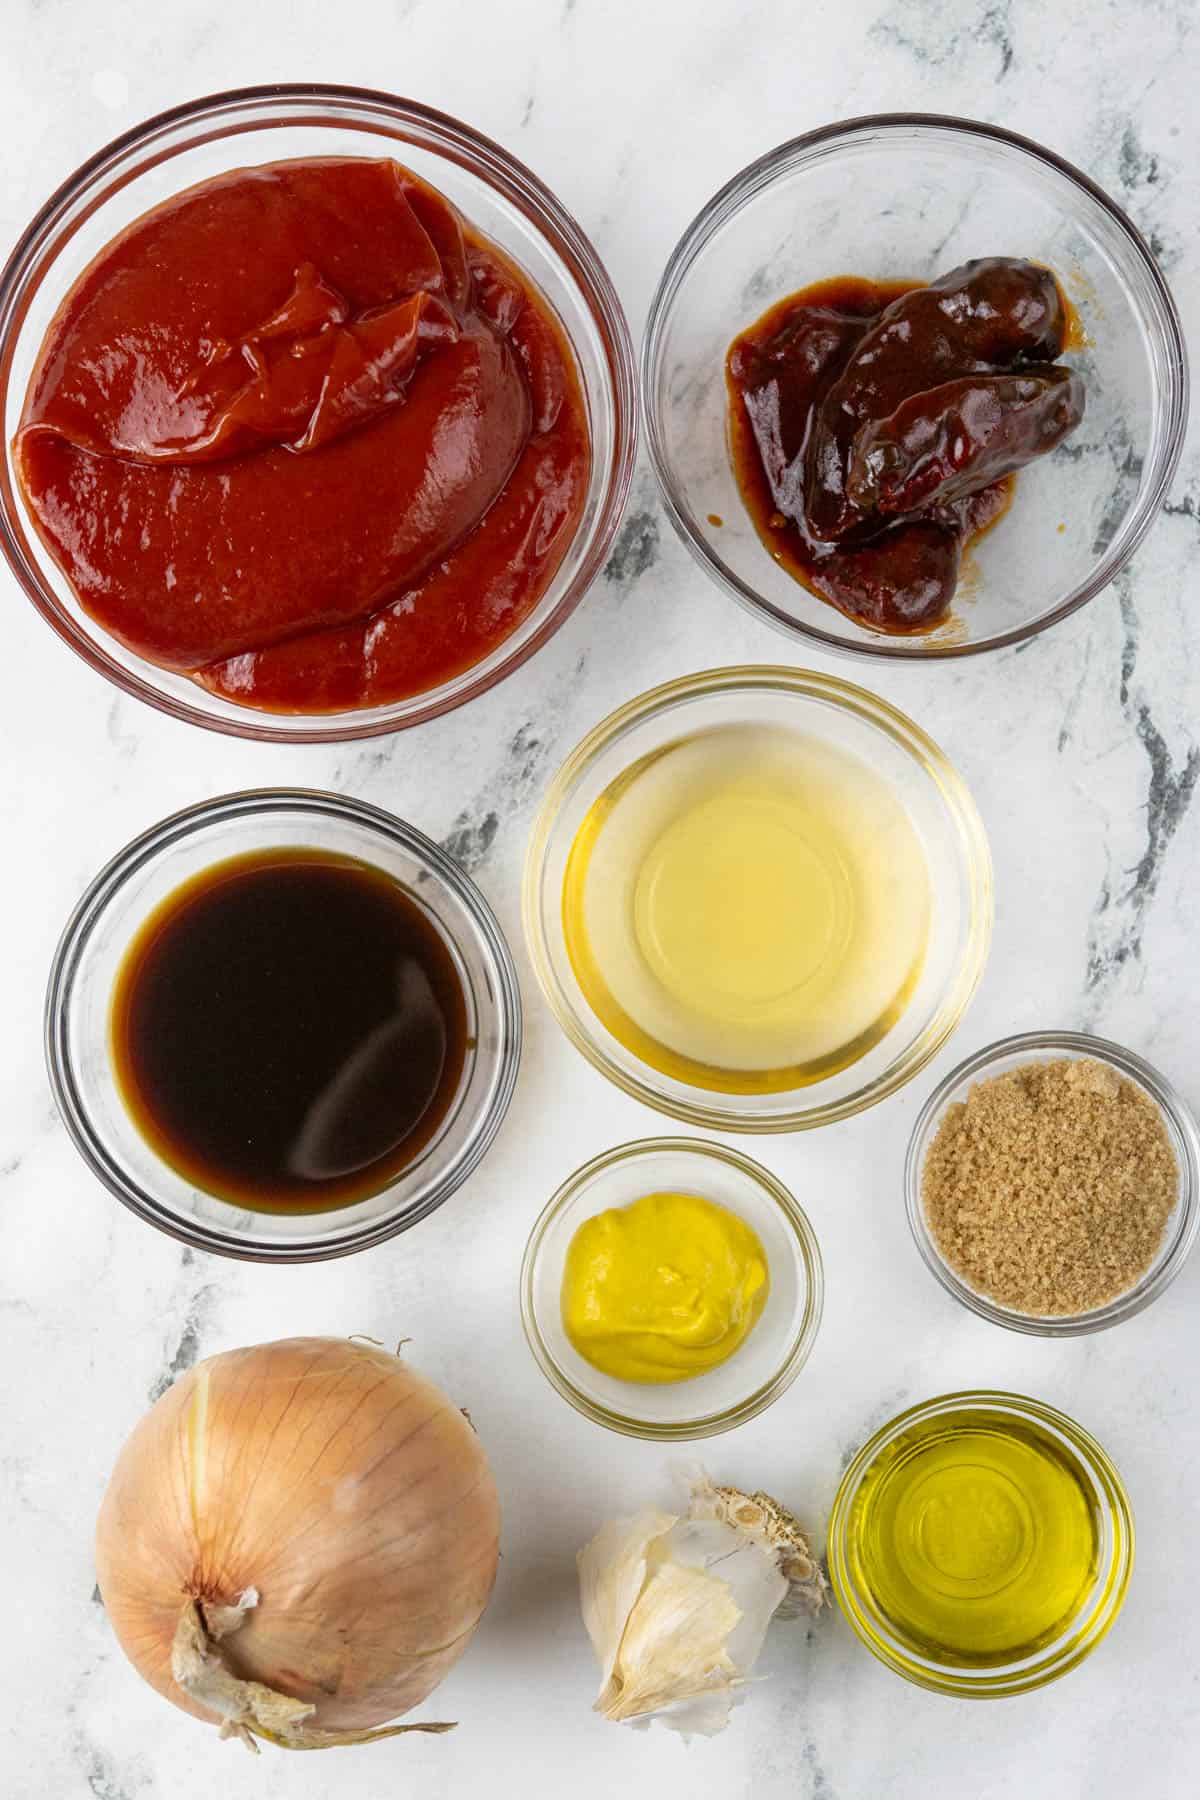 Ingredients for Chipotle BBQ Sauce